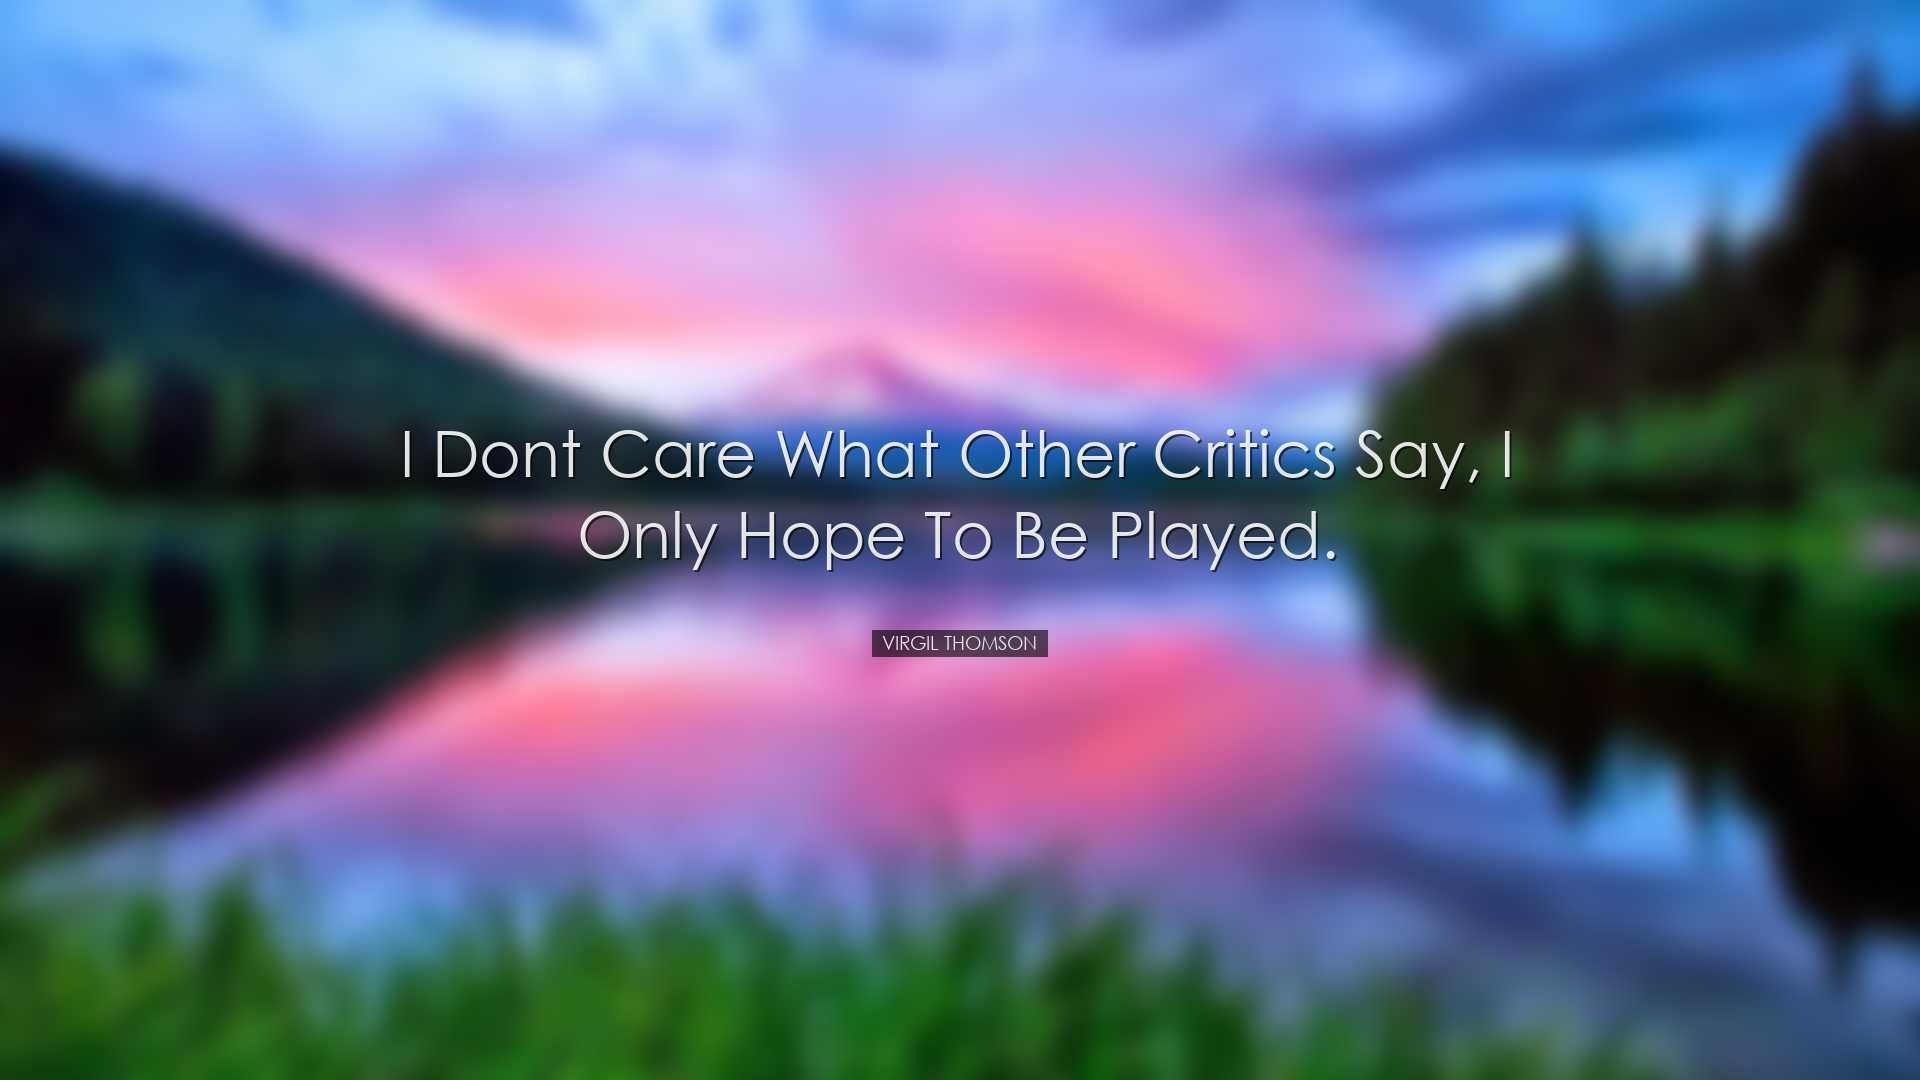 I dont care what other critics say, I only hope to be played. - Vi